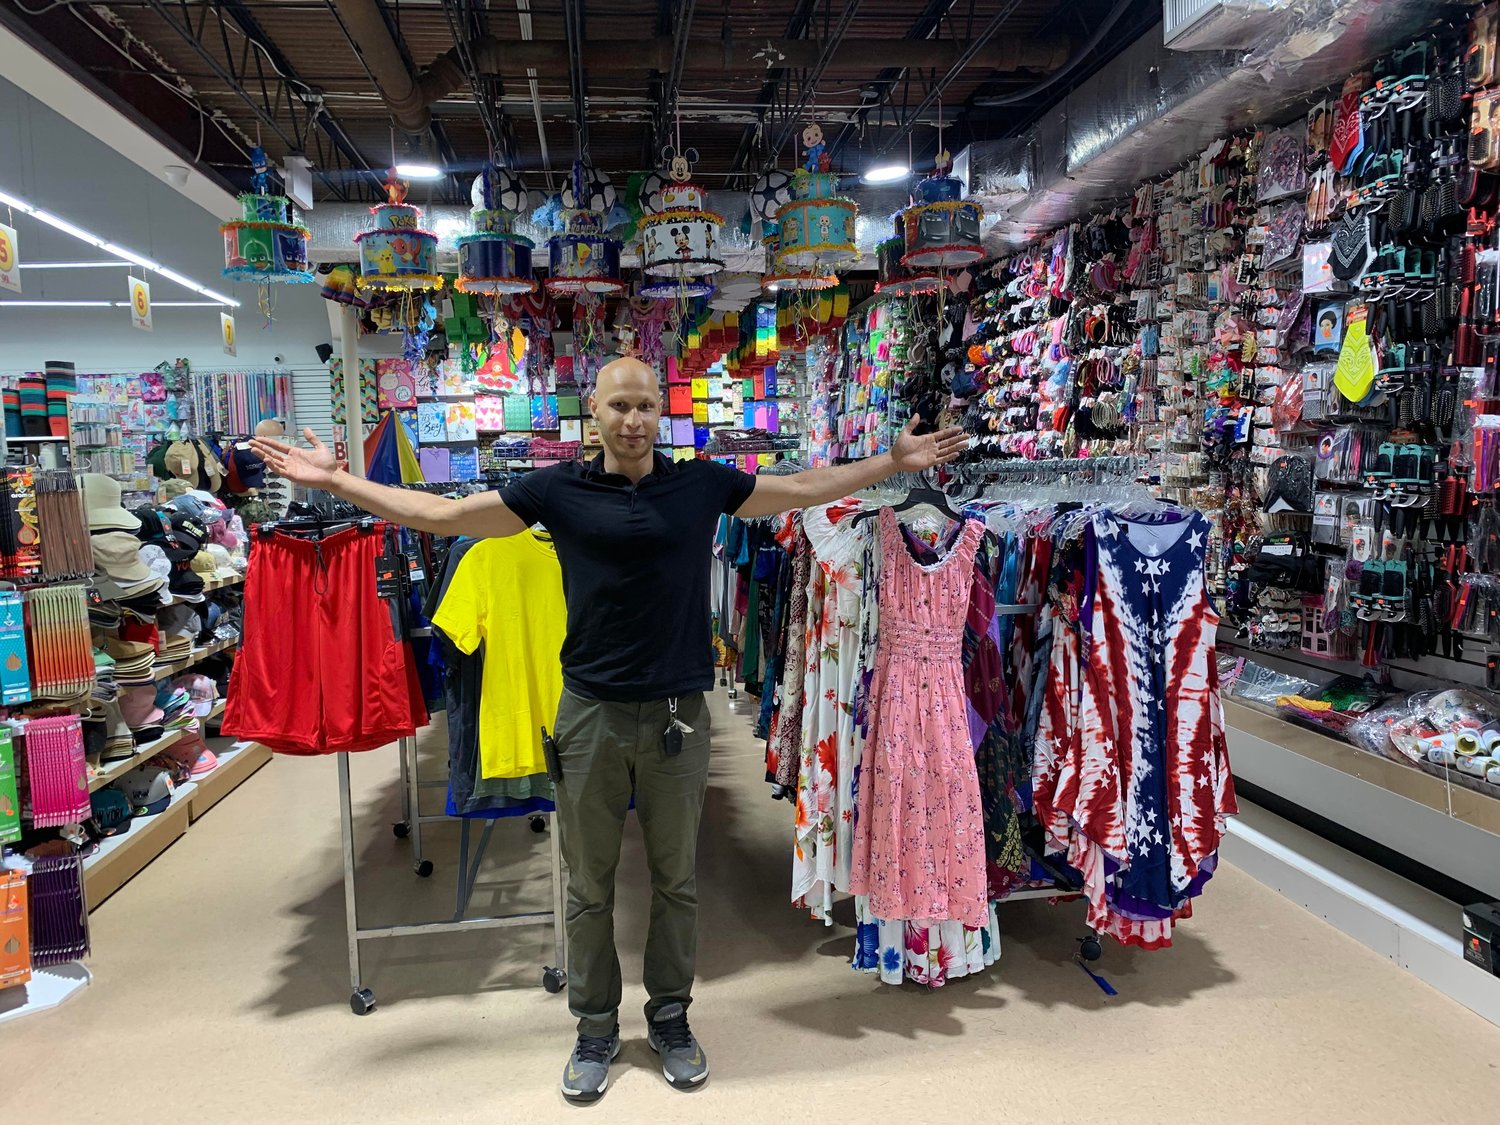 Grand 99¢ Plus manager Moazzal Ali showing the selection of clothing,        accessories, and some of the party supplies.